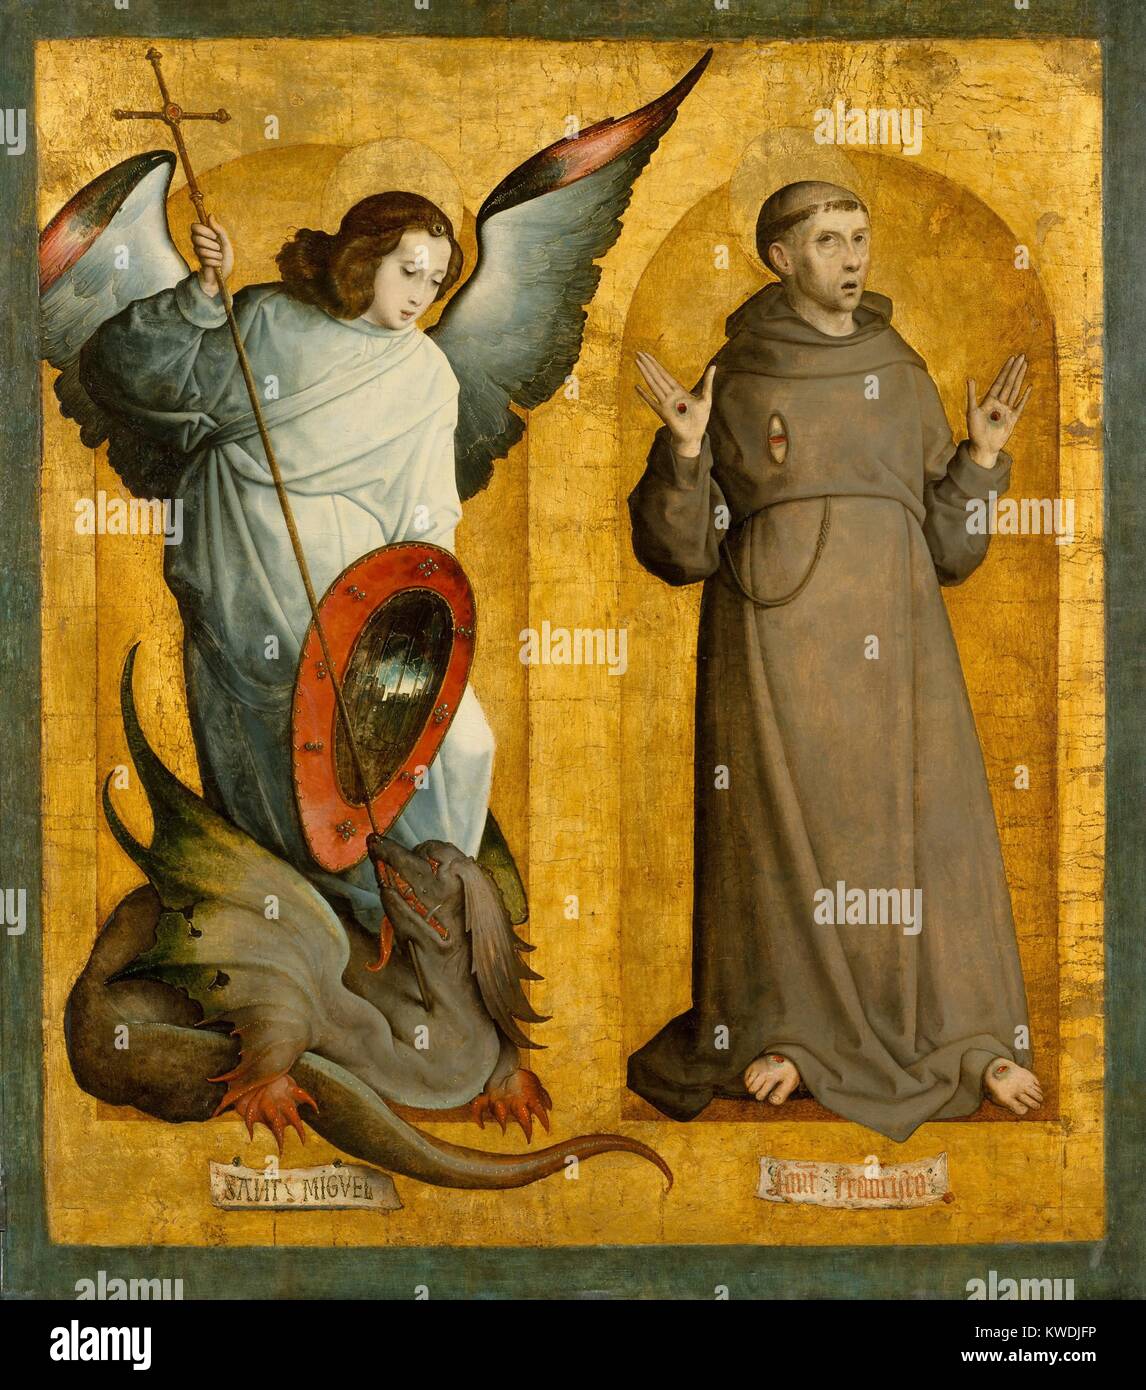 SAINTS MICHAEL AND FRANCIS, by Juan de Flandes, 1505-09, Northern Renaissance painting, oil on wood. In this panel from a Spanish altarpiece, the Flemish painter created contrasting figures: Saint Francis, neatly contained within the shallow space; while Michael extends outside his niche, with the dragon at his feet (BSLOC 2017 16 111) Stock Photo